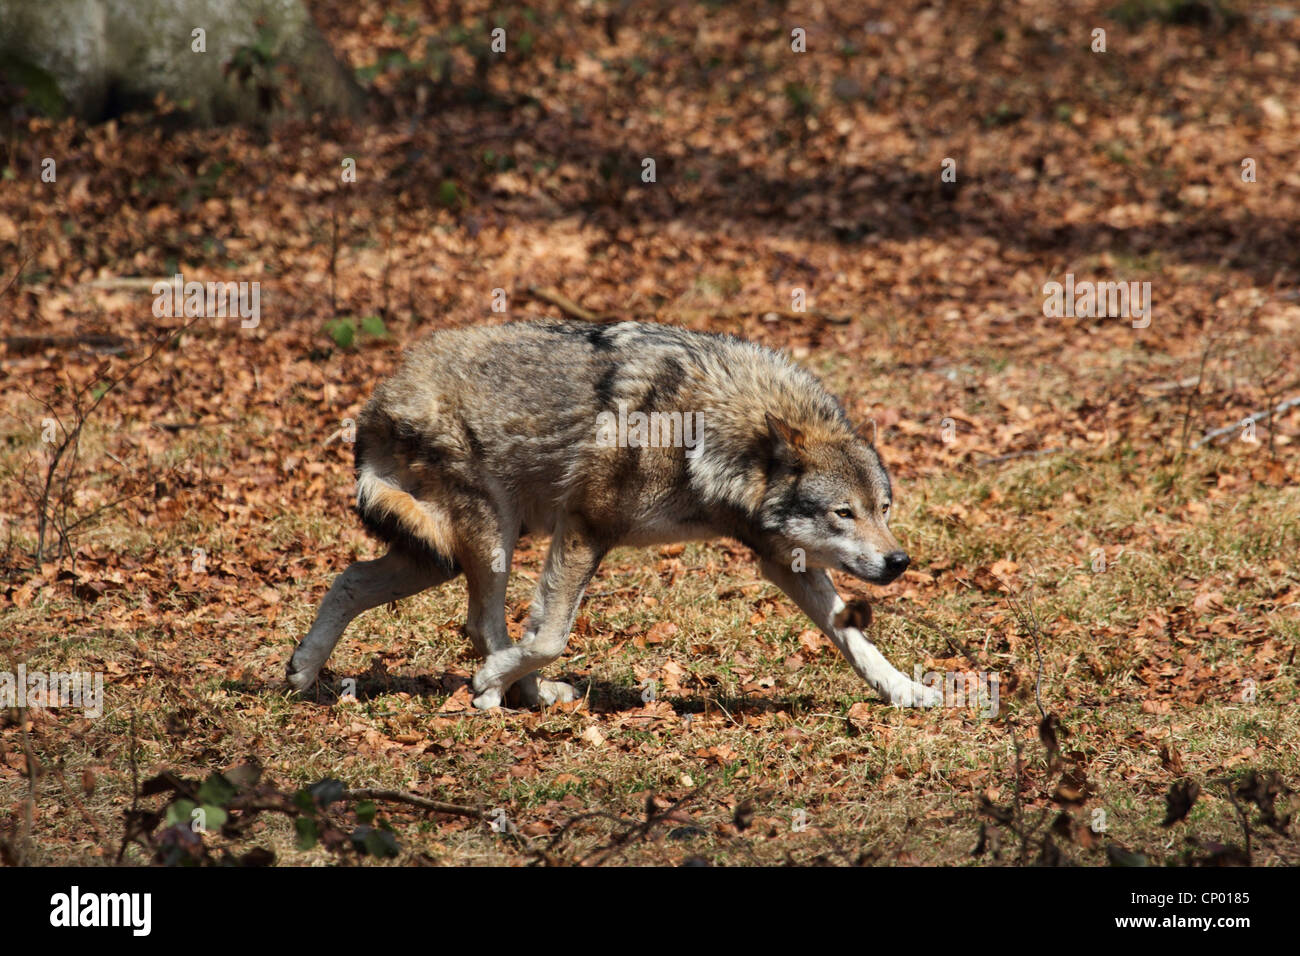 European gray wolf (Canis lupus lupus), subservient wolf, Germany Stock Photo